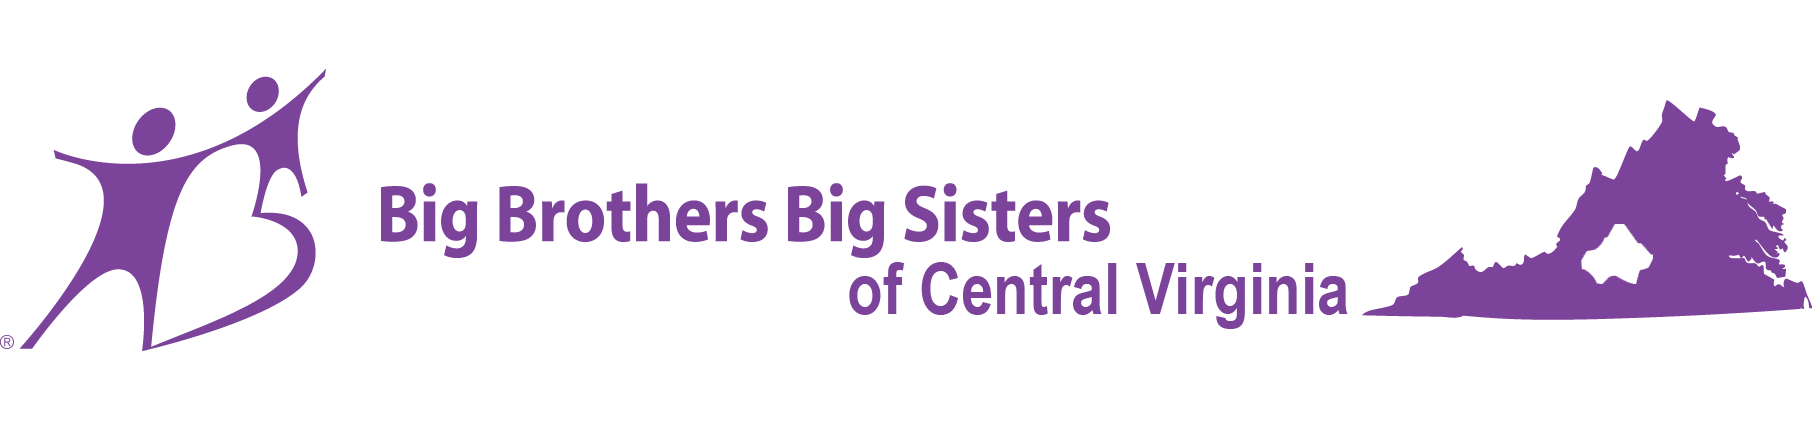 Pete Warren, Big Brothers Big Sisters of Central Virginia
in a letter to Ambassador Andrew Young